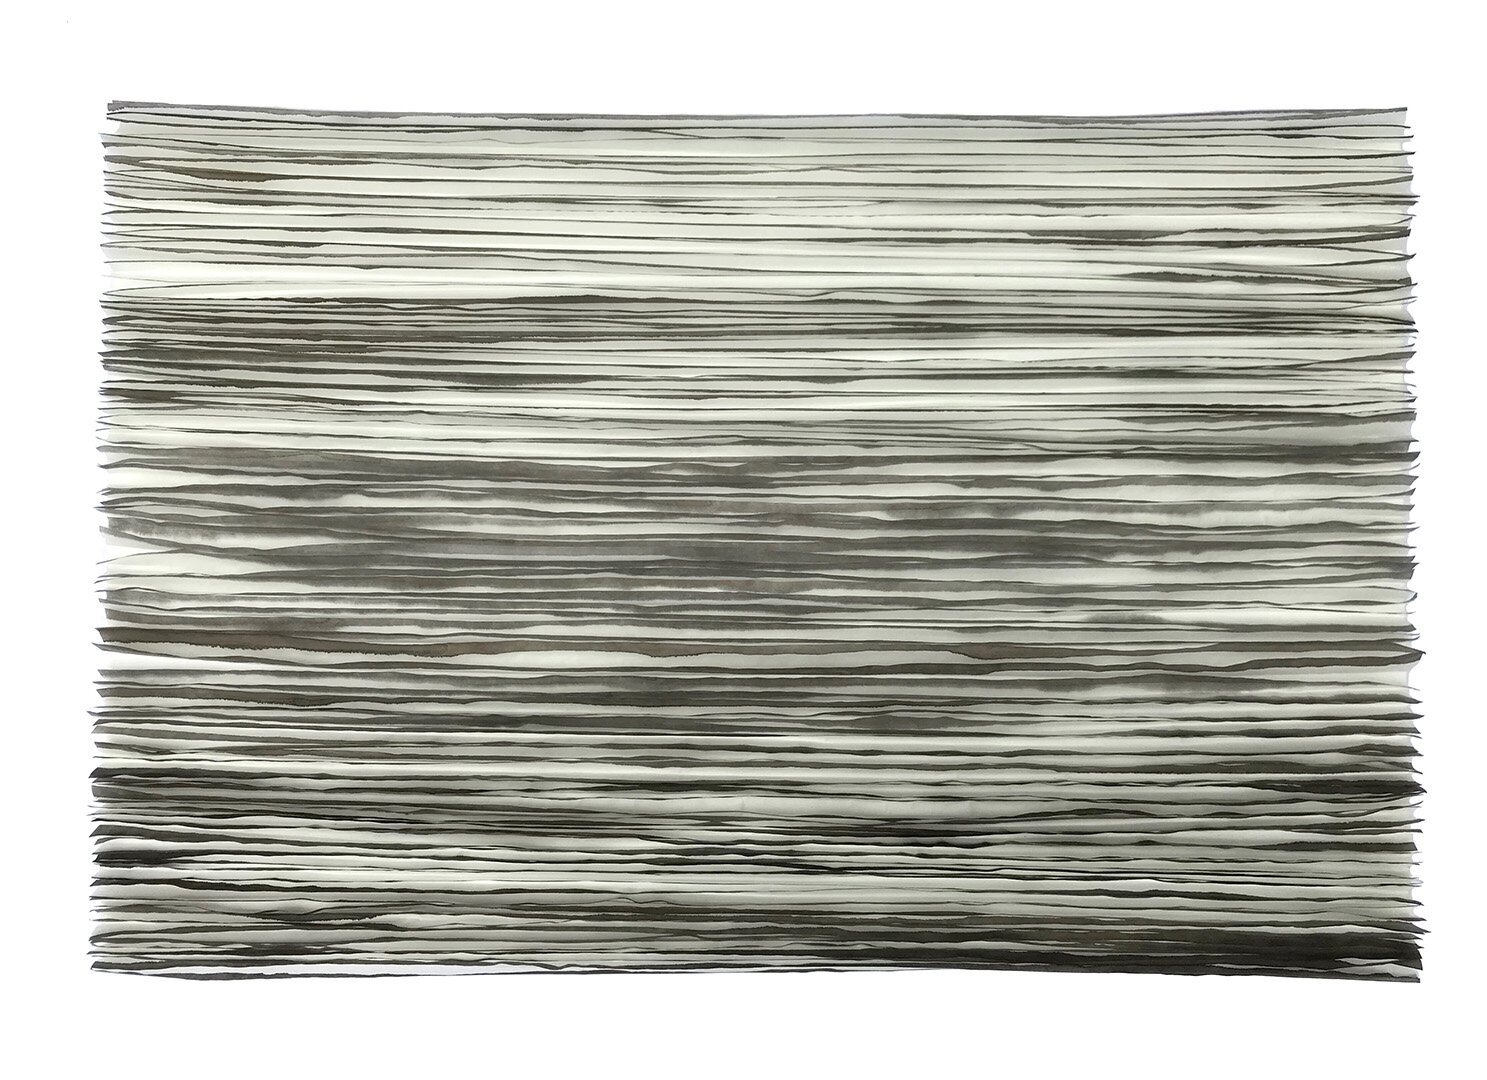  Waters Edge, 2018 (sold) Mulberry Paper, India Ink, Wax 24 x 48 x 2 inches  The mood and texture of space, light and organic form has formed an important part of my work. Inspired by the ephemeral and the anecdotal, these series represent an explora